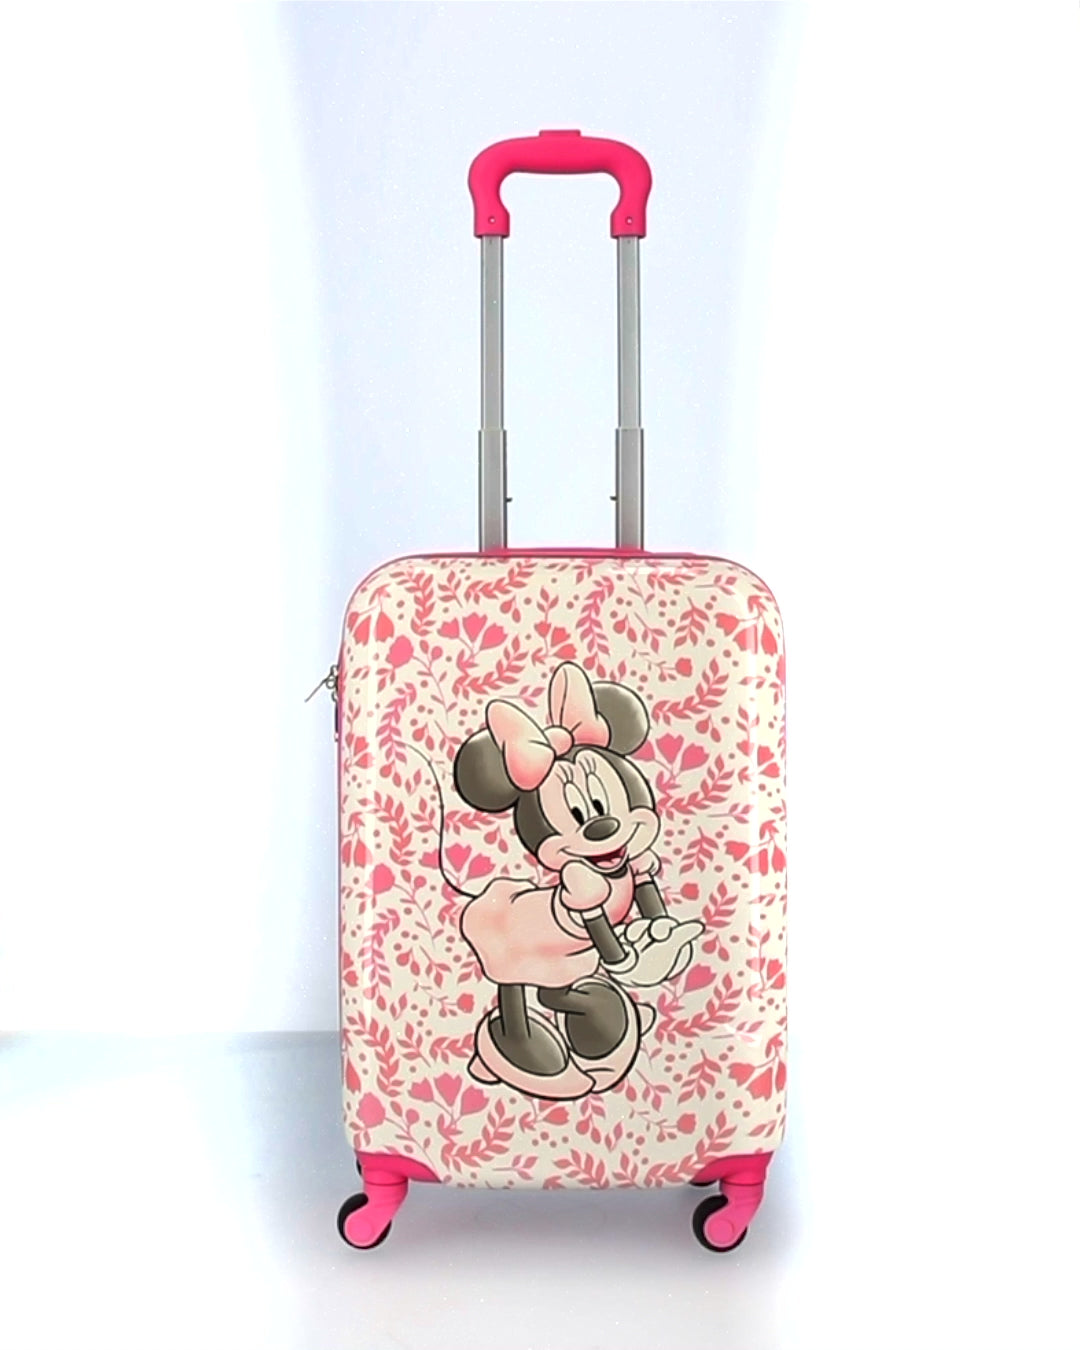 Disney Ful Minnie Mouse Floral Pink Hardside Spinner Luggage - 20.5" Carry Suitcase for Kids